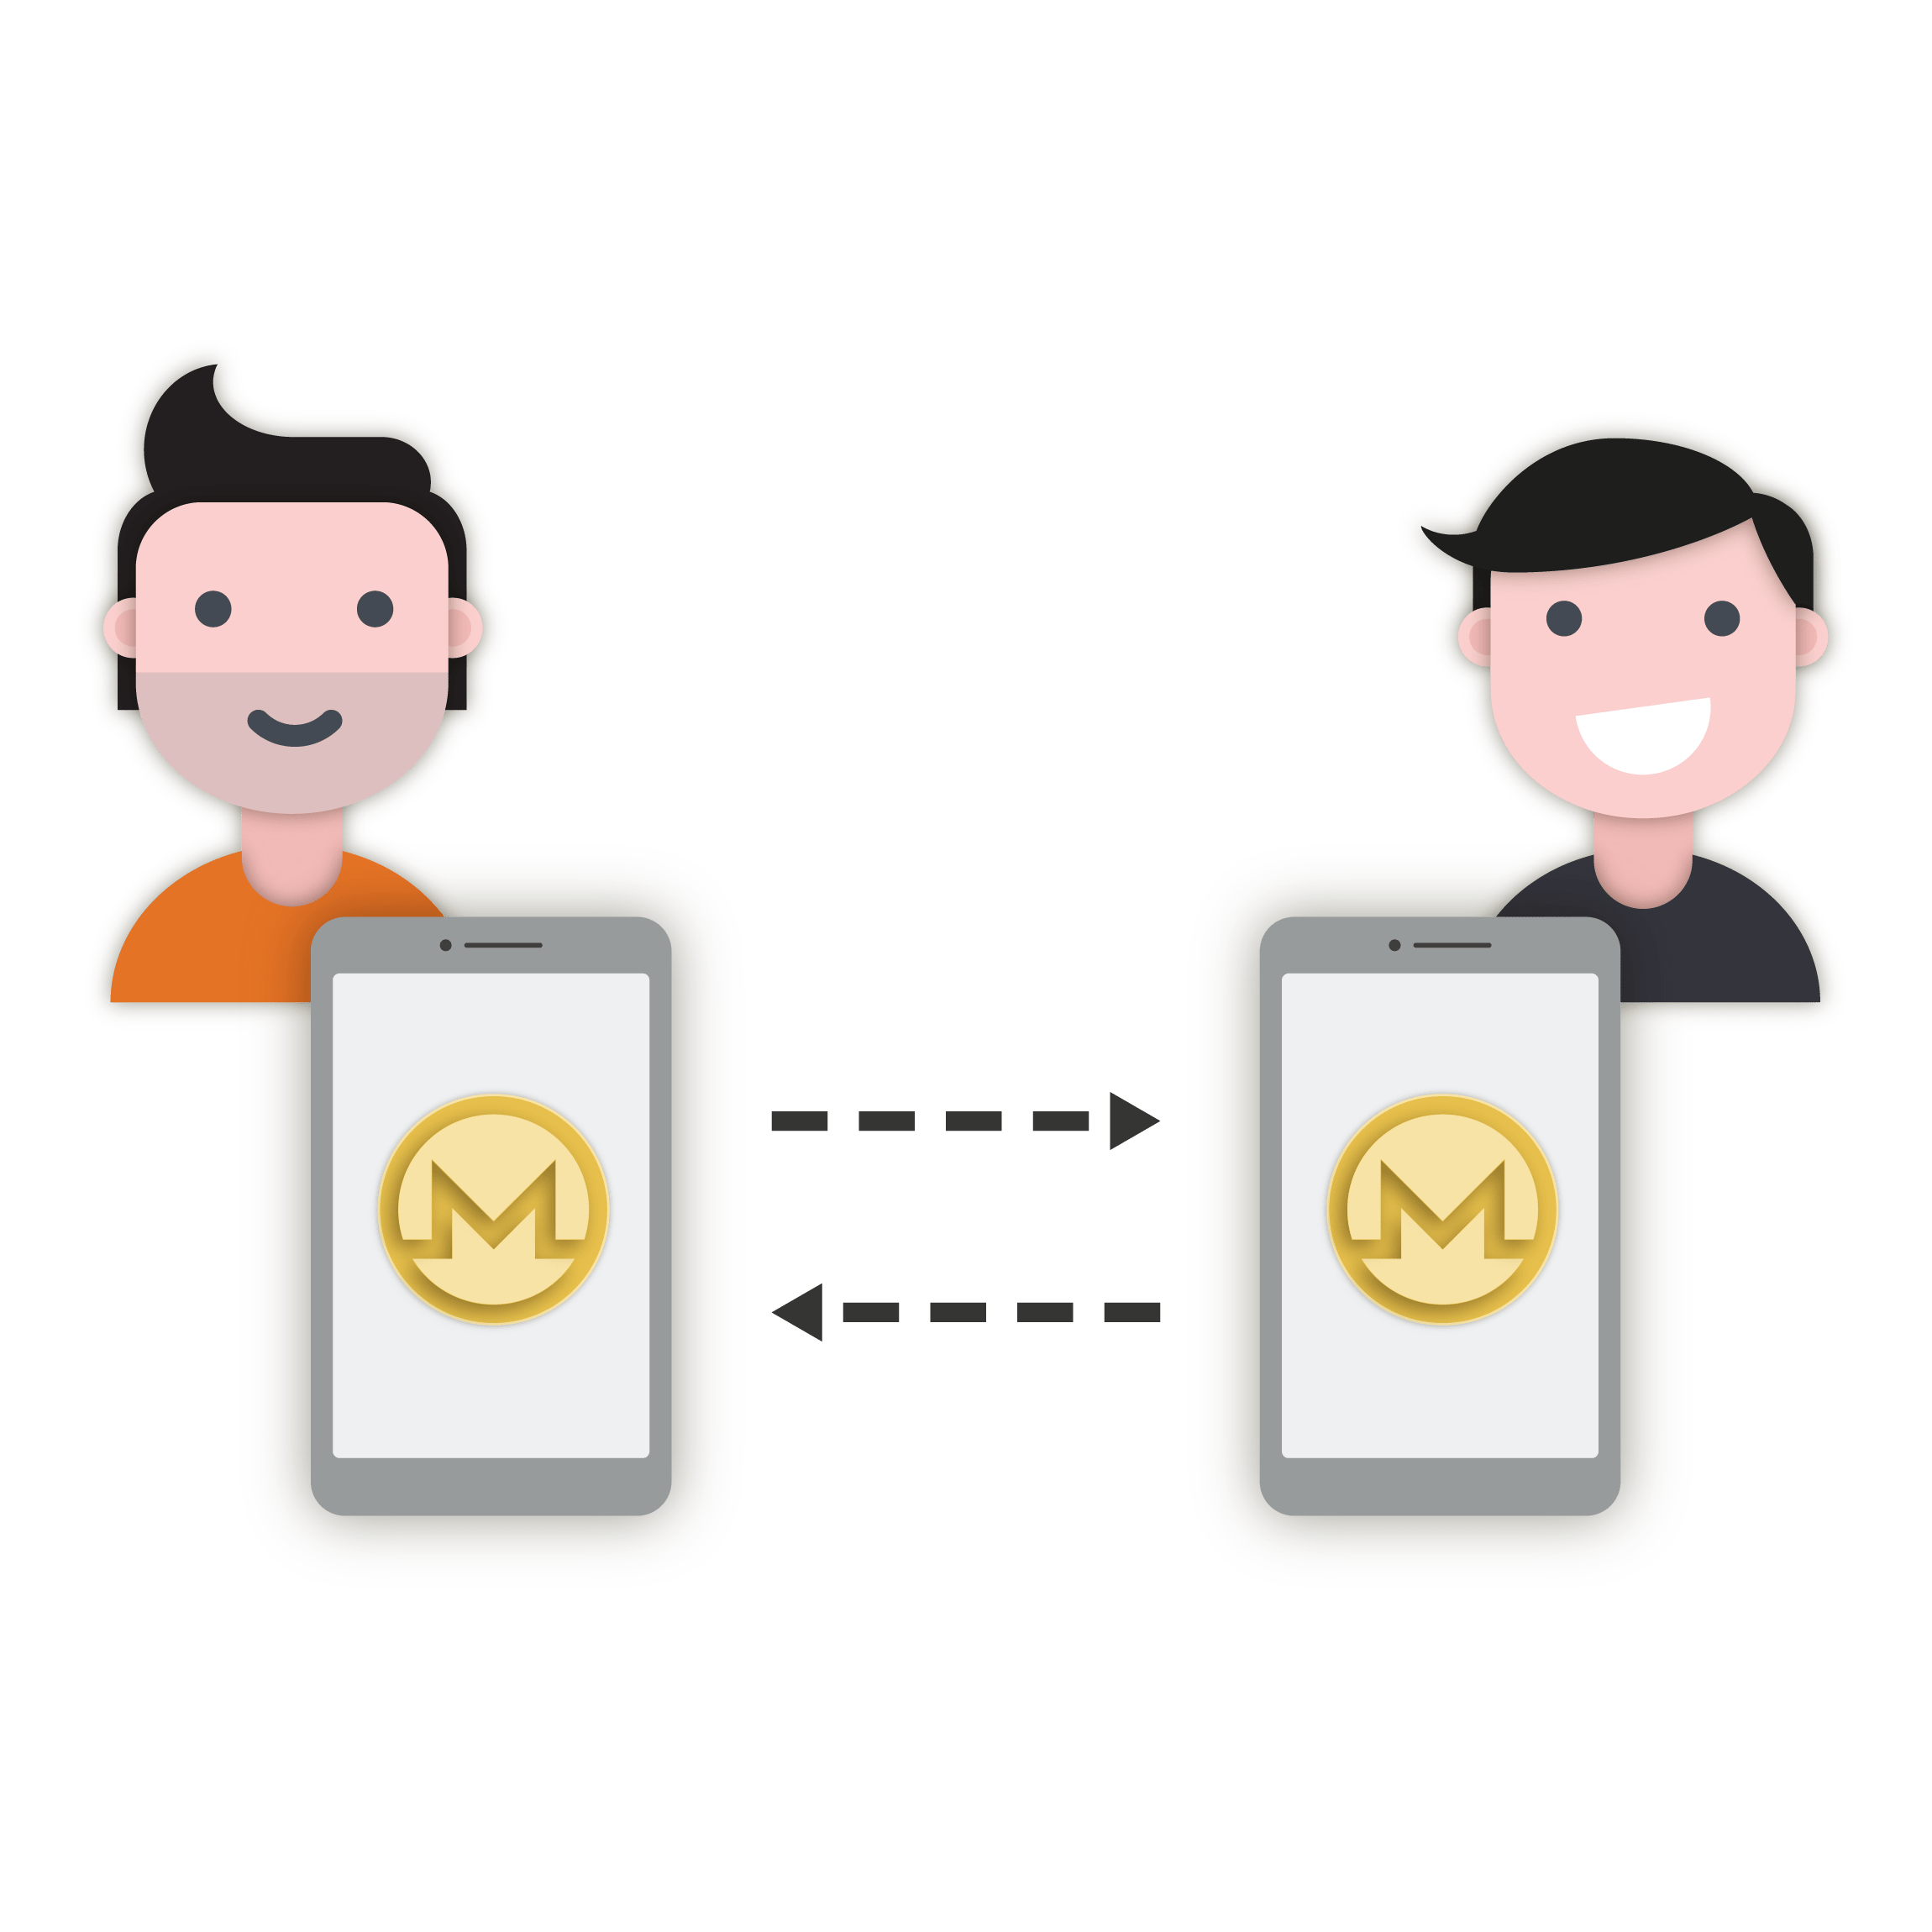 Monero is sent from one person to another.